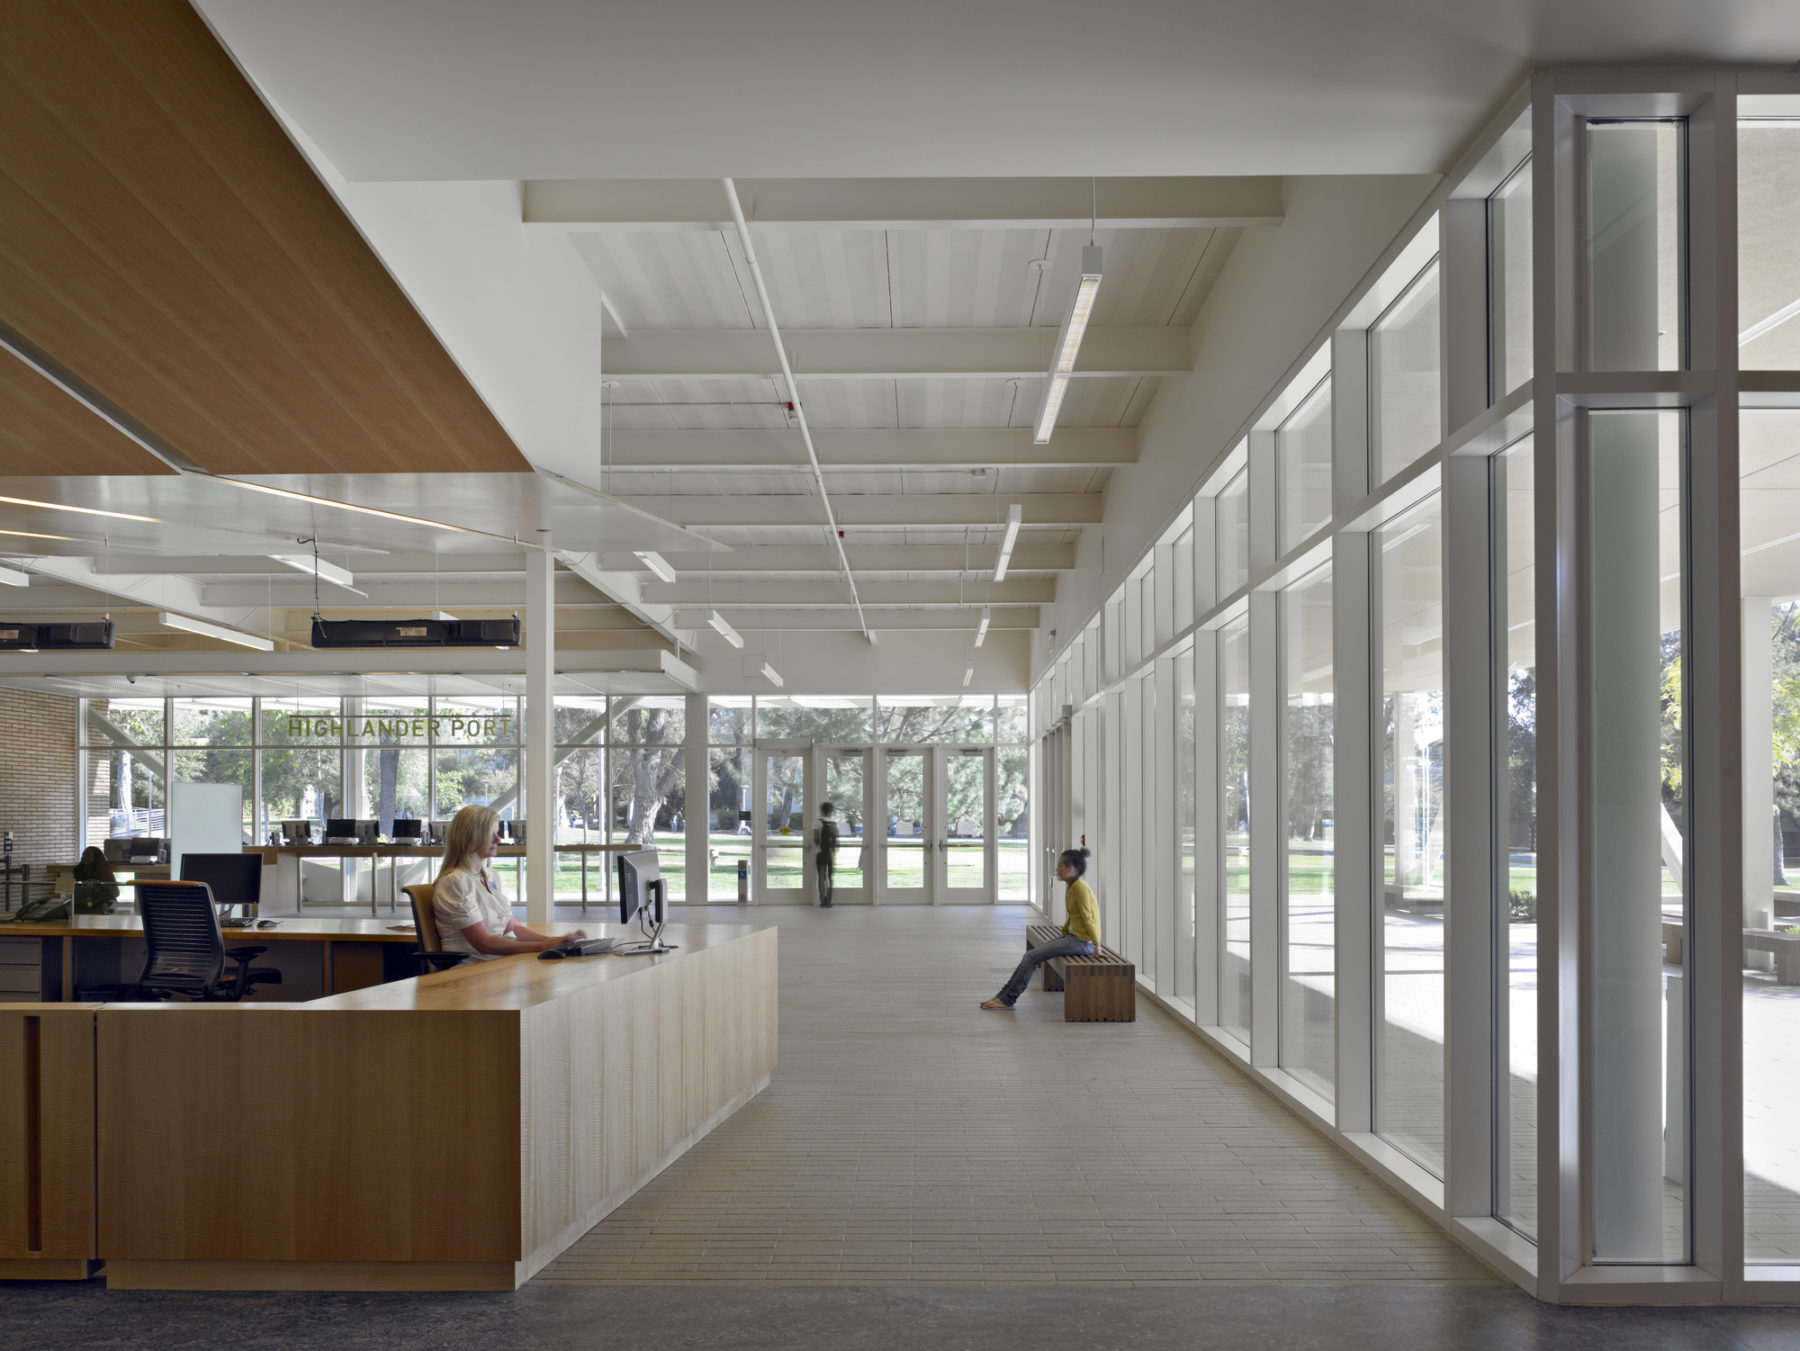 Interior photo of the building entrance and welcome desk. A student sits on a bench in the background